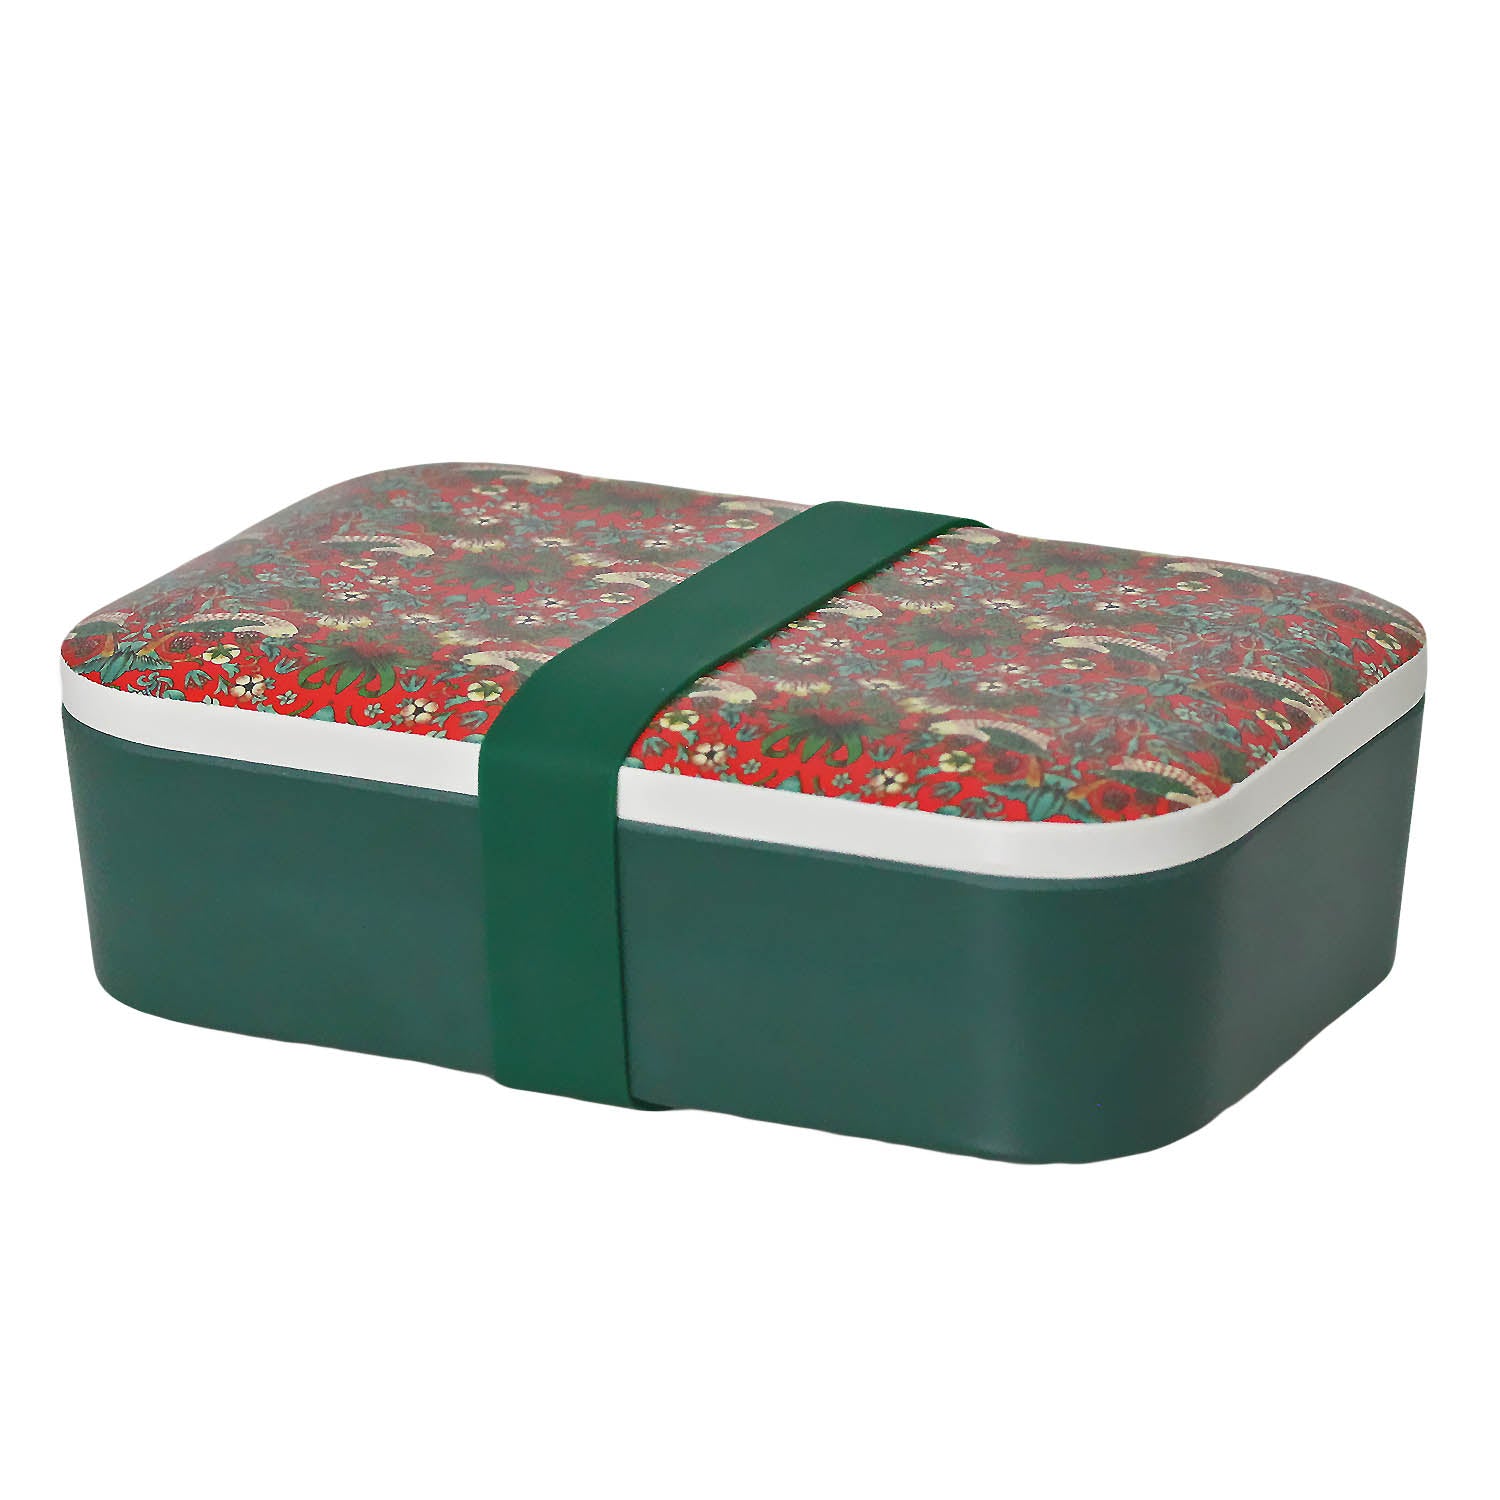 William Morris Strawberry Thief Floral Bamboo Lunchbox - Bonnypack